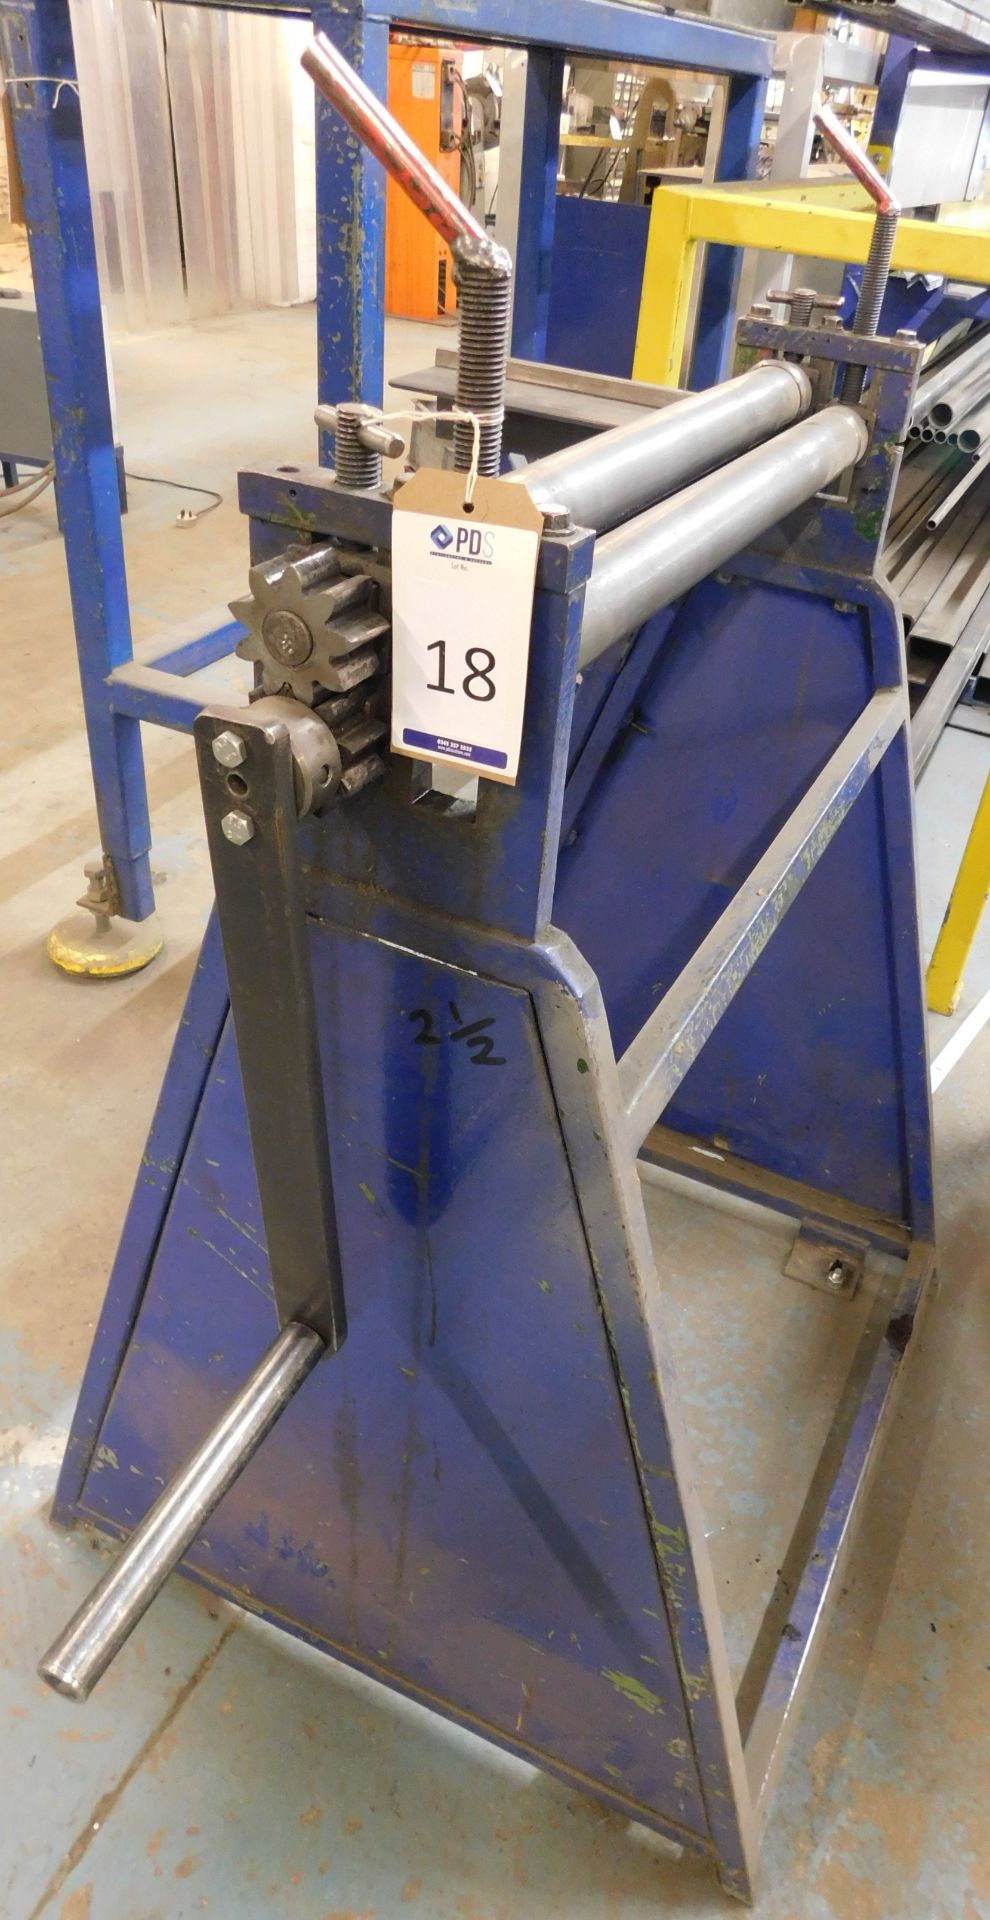 Set of Manual Pyramid Rollers, 52cm (Location: Kettering - See General Notes for Details)